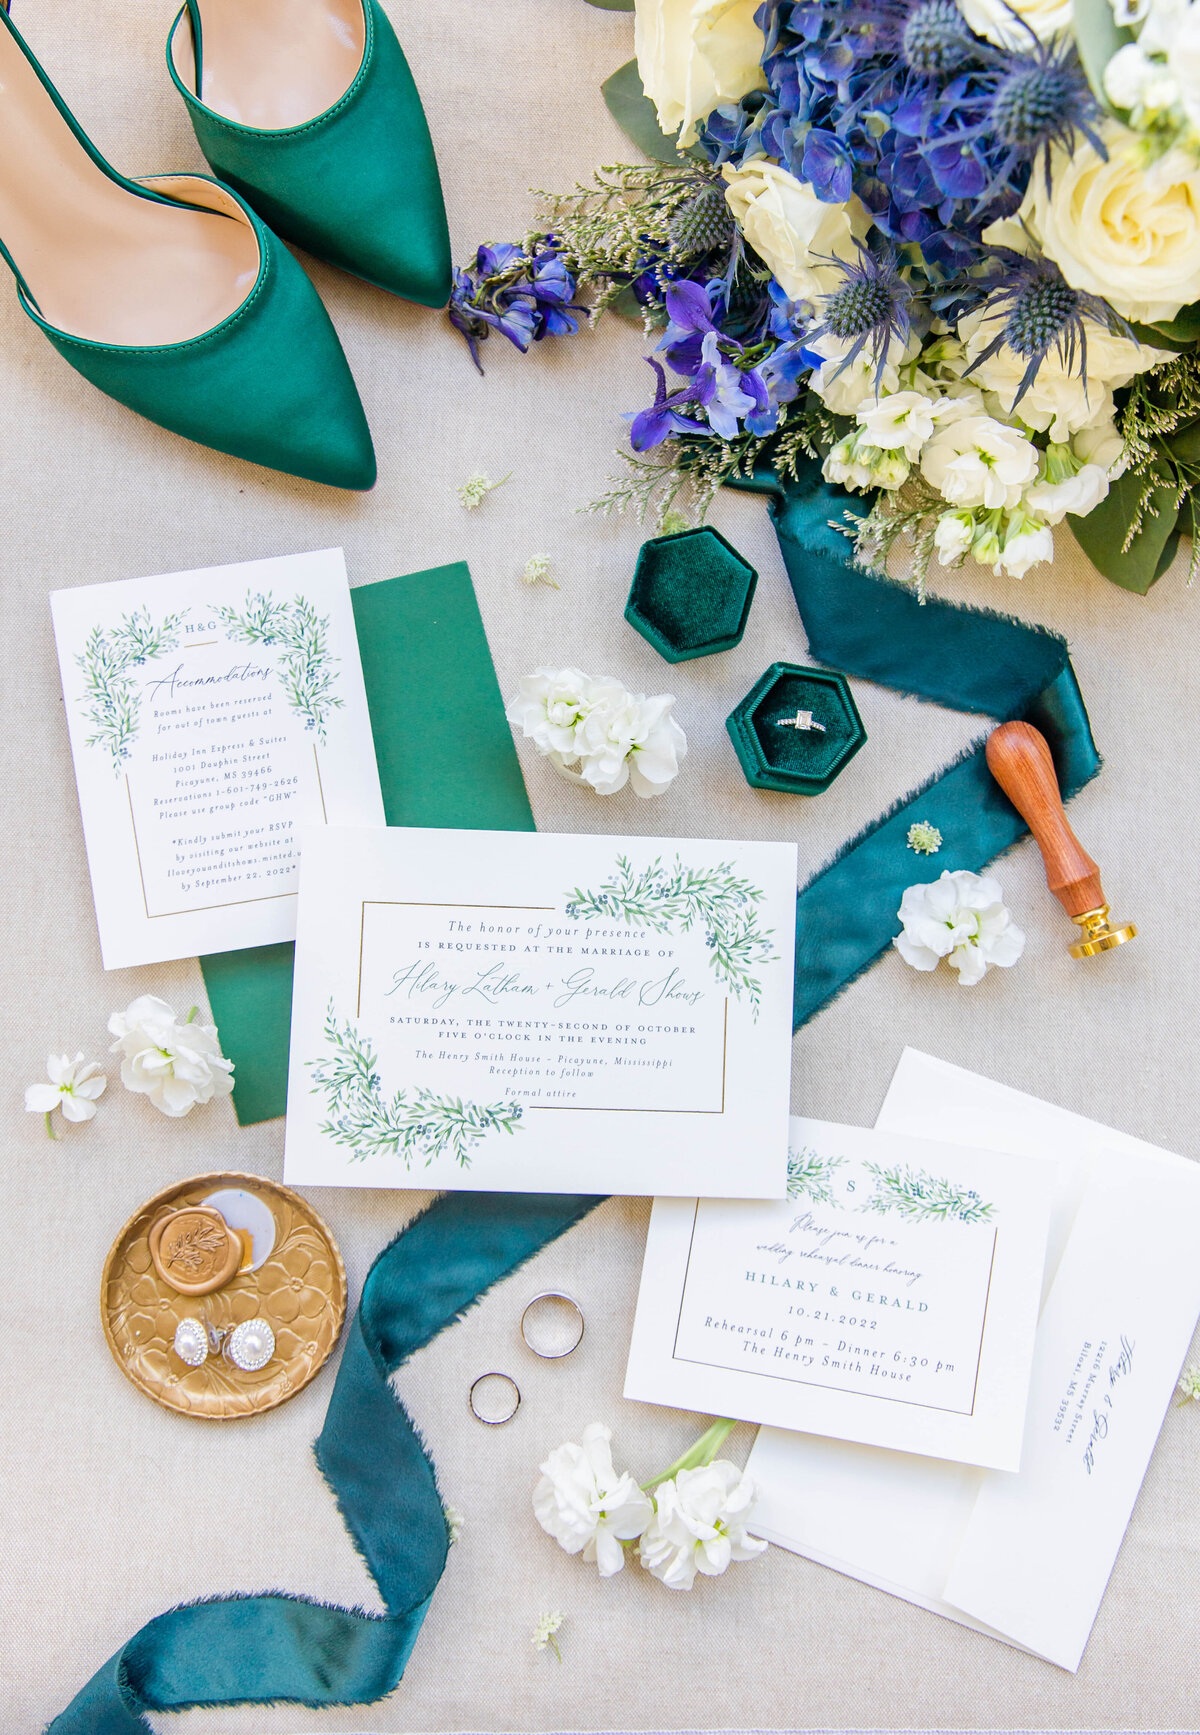 wedding day details with shades of emerald green, white and gold